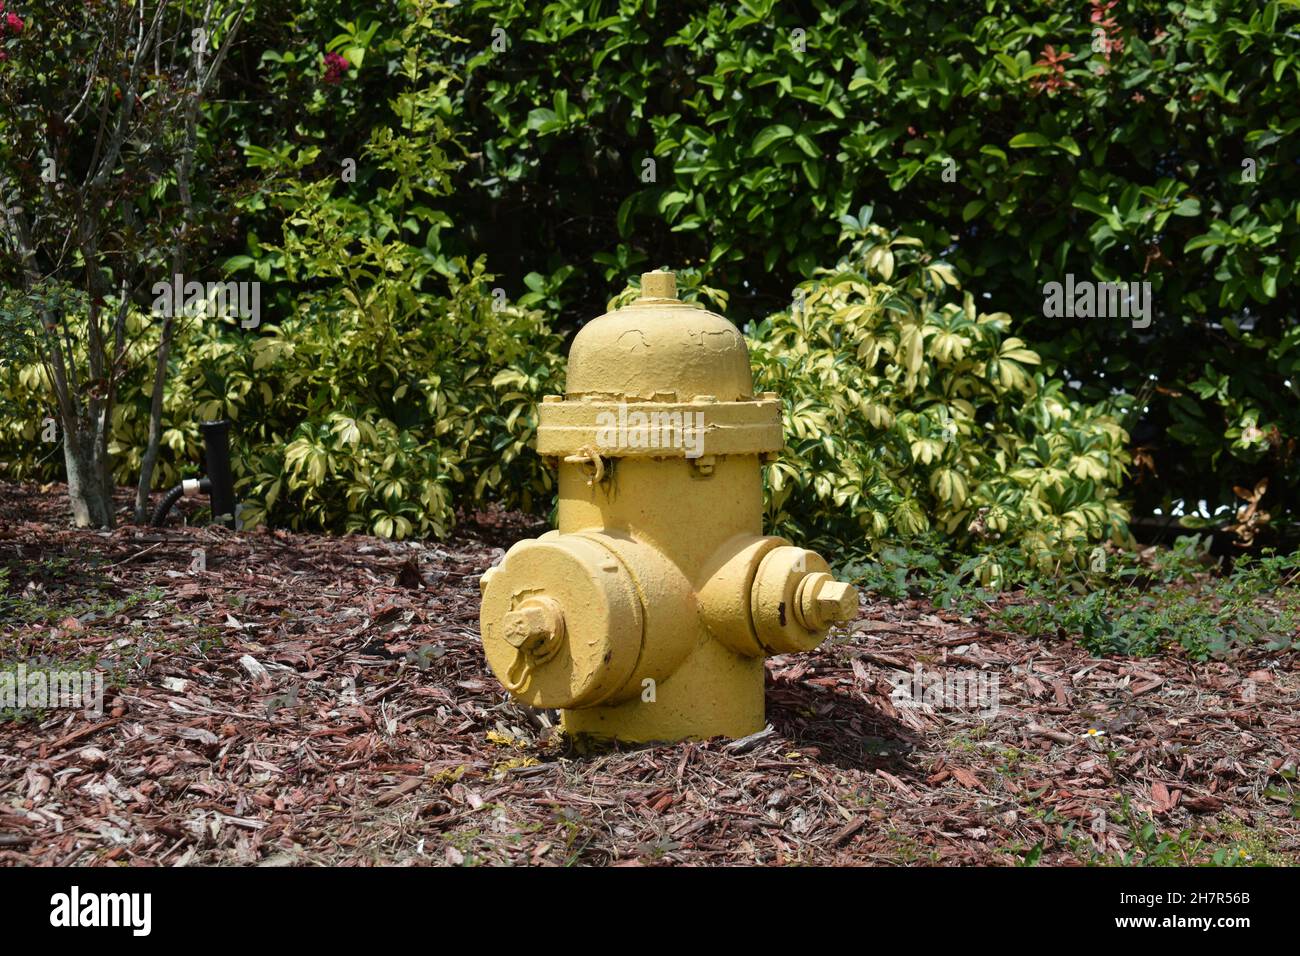 Close-up old yellow fire hydrant. Stock Photo